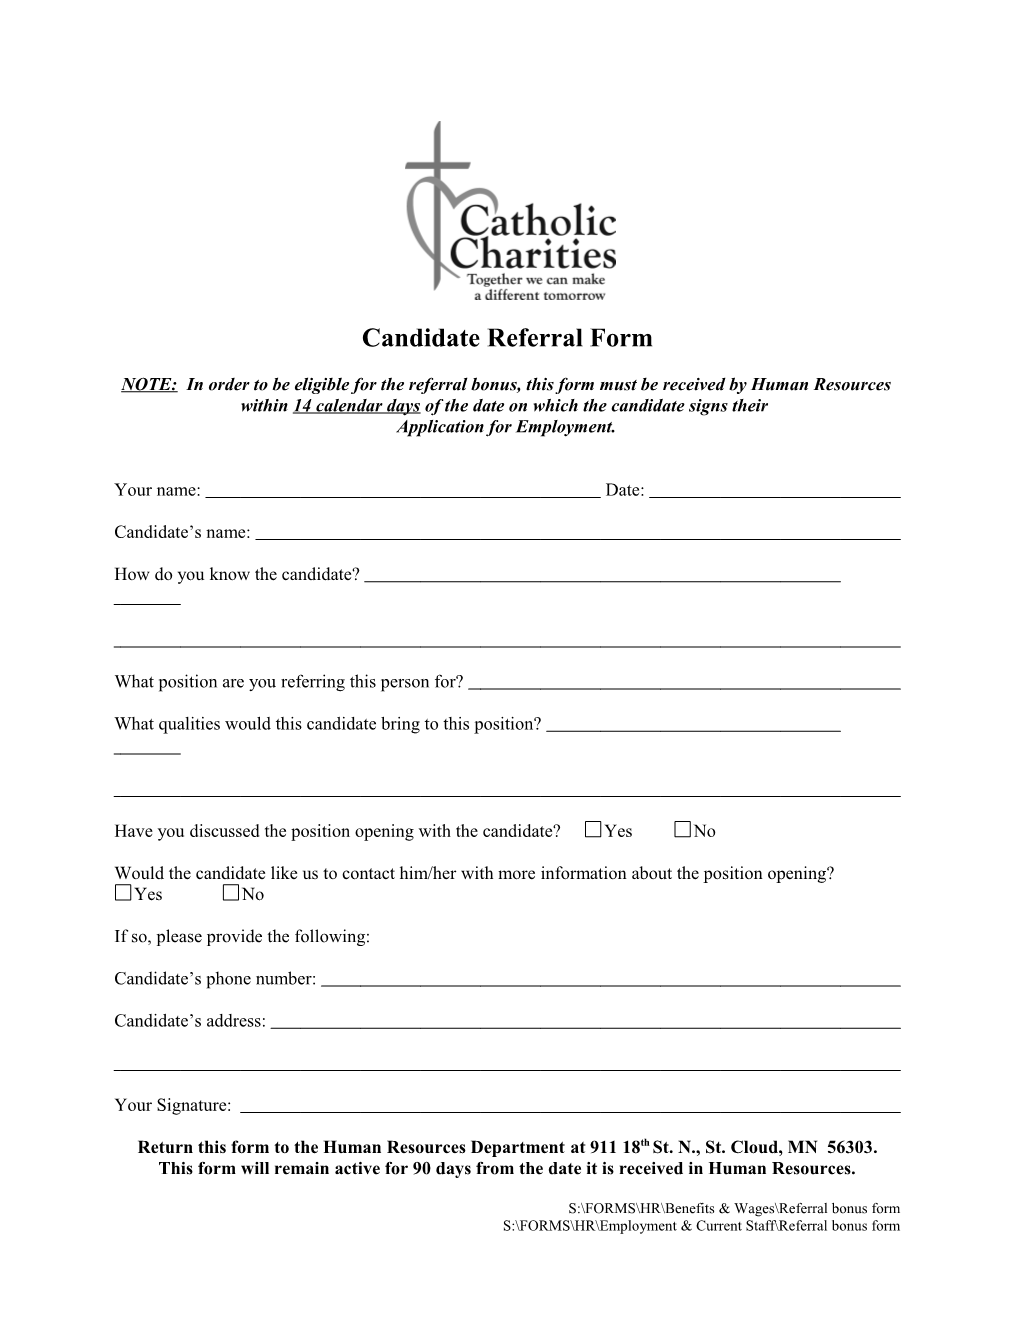 Candidate Referral Form